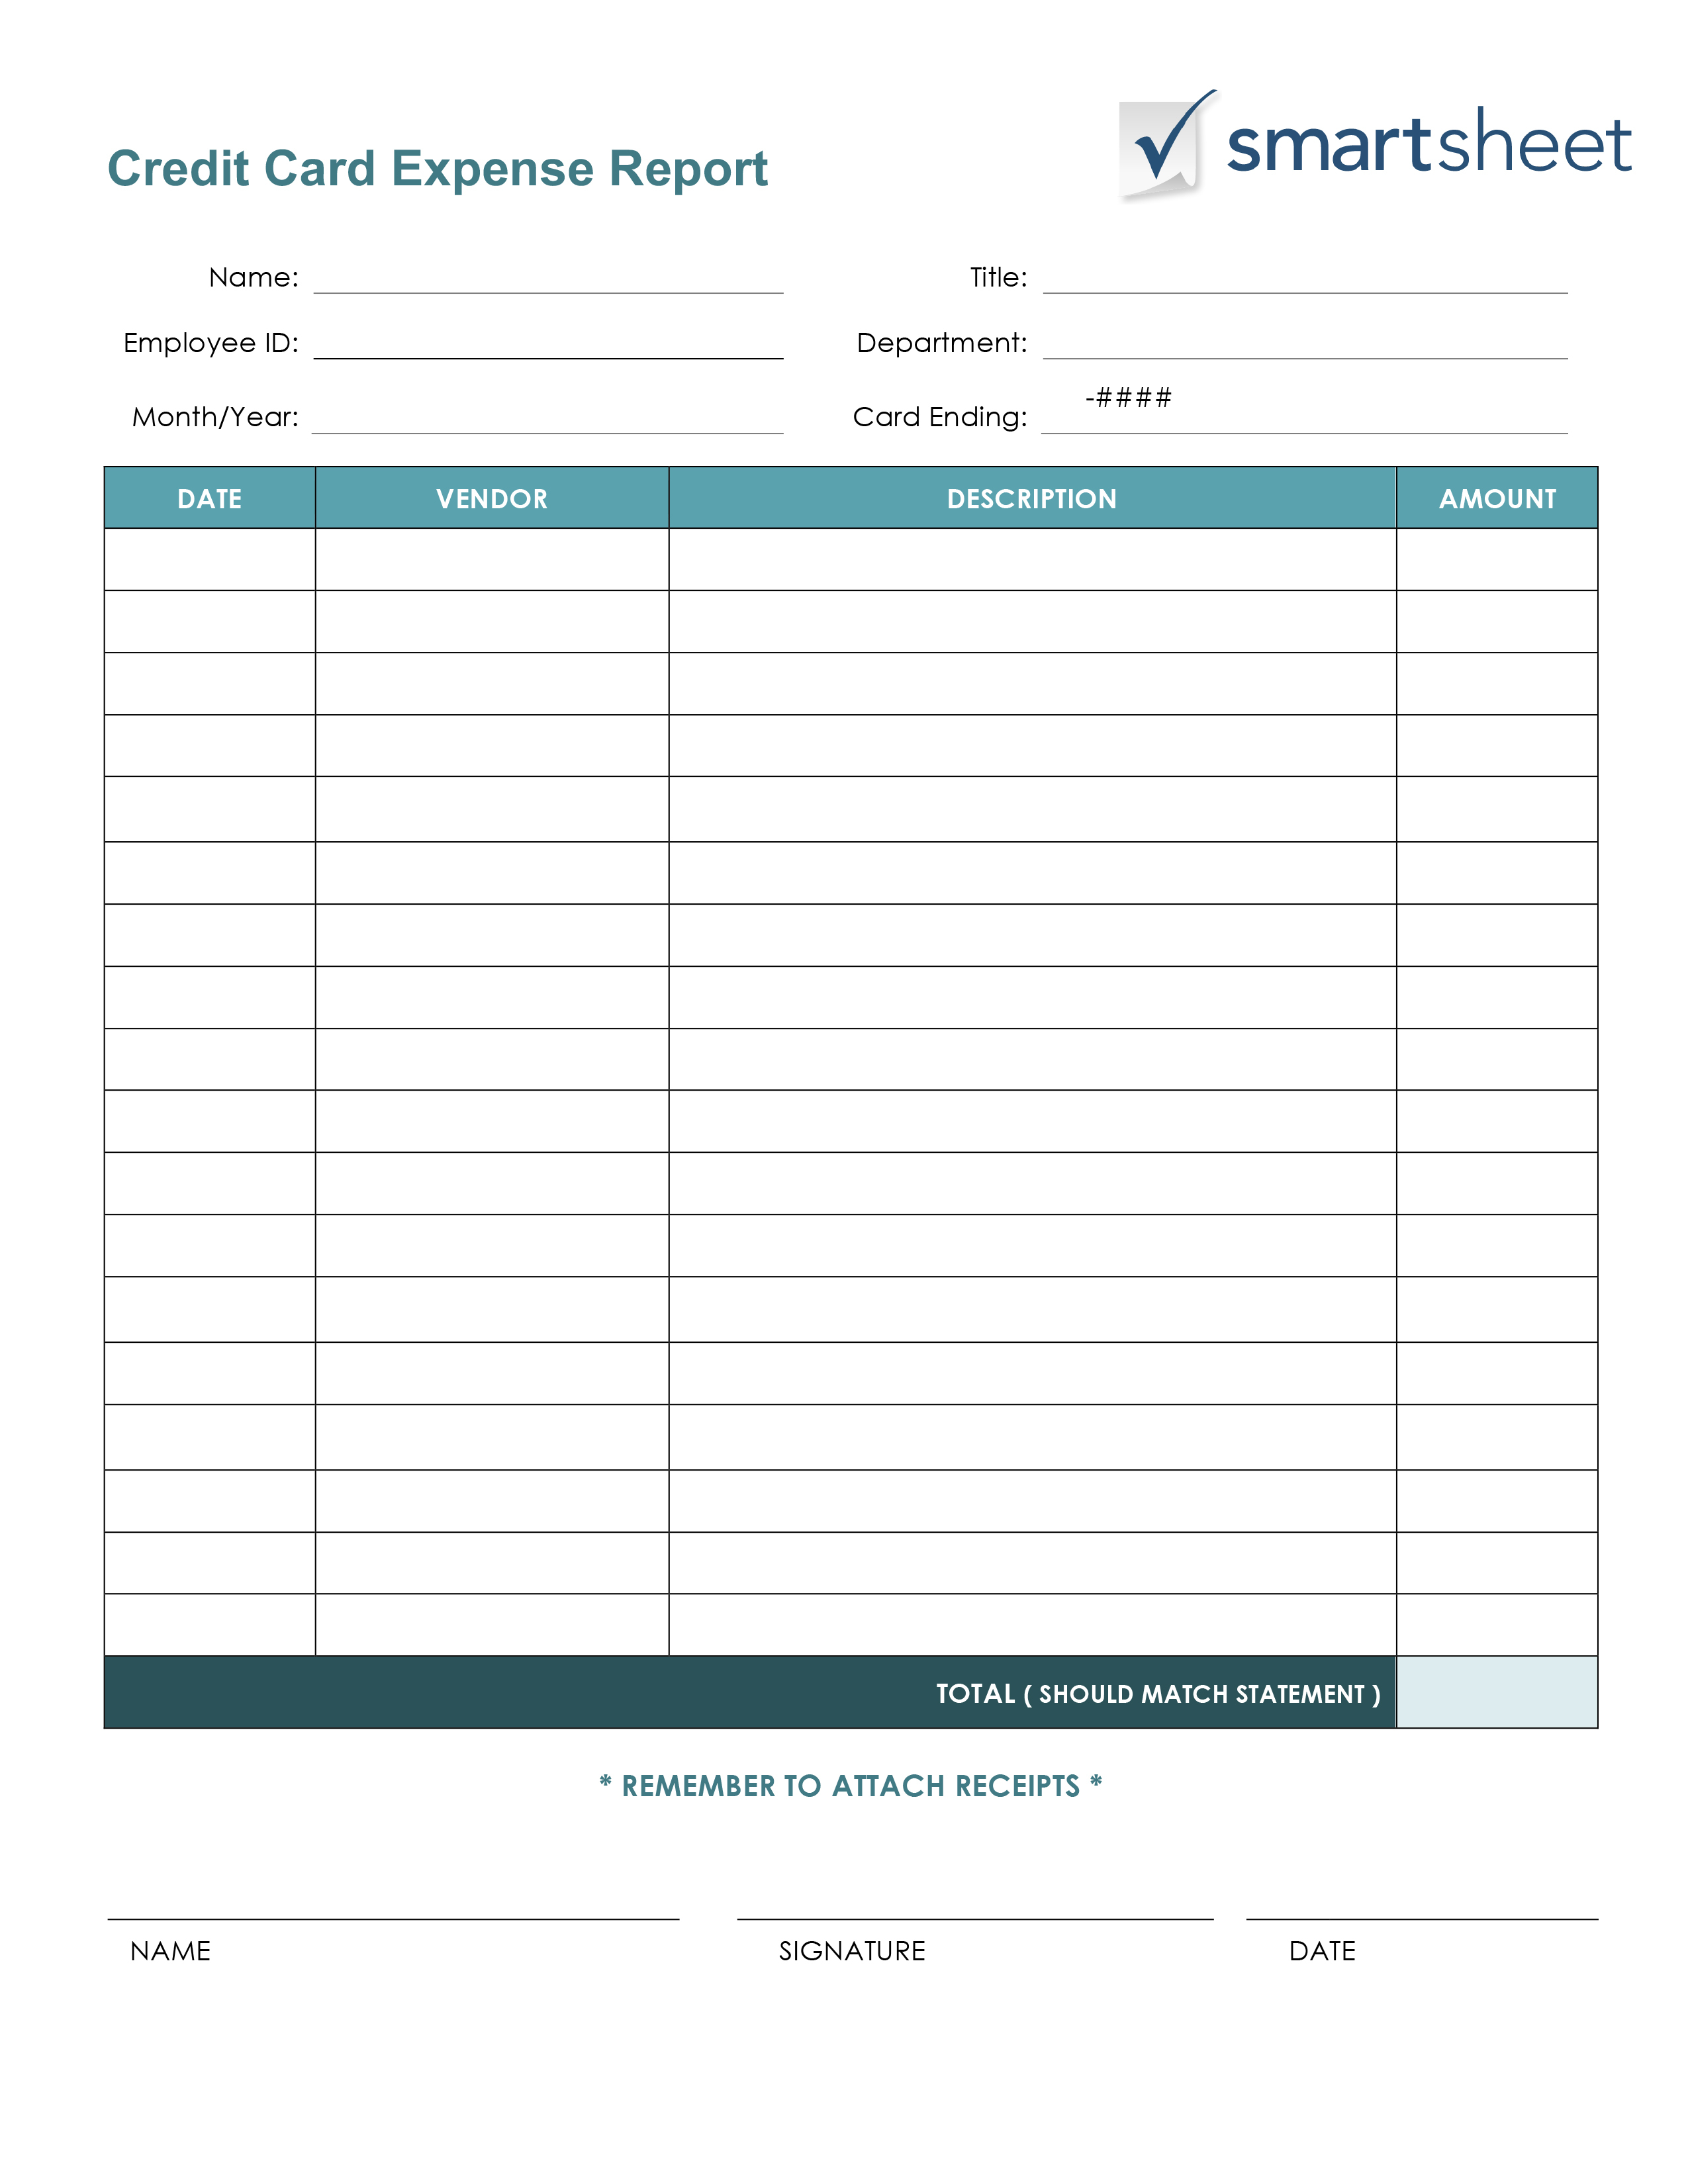 Free Expense Report Templates Smartsheet to Business Operating Expenses Template